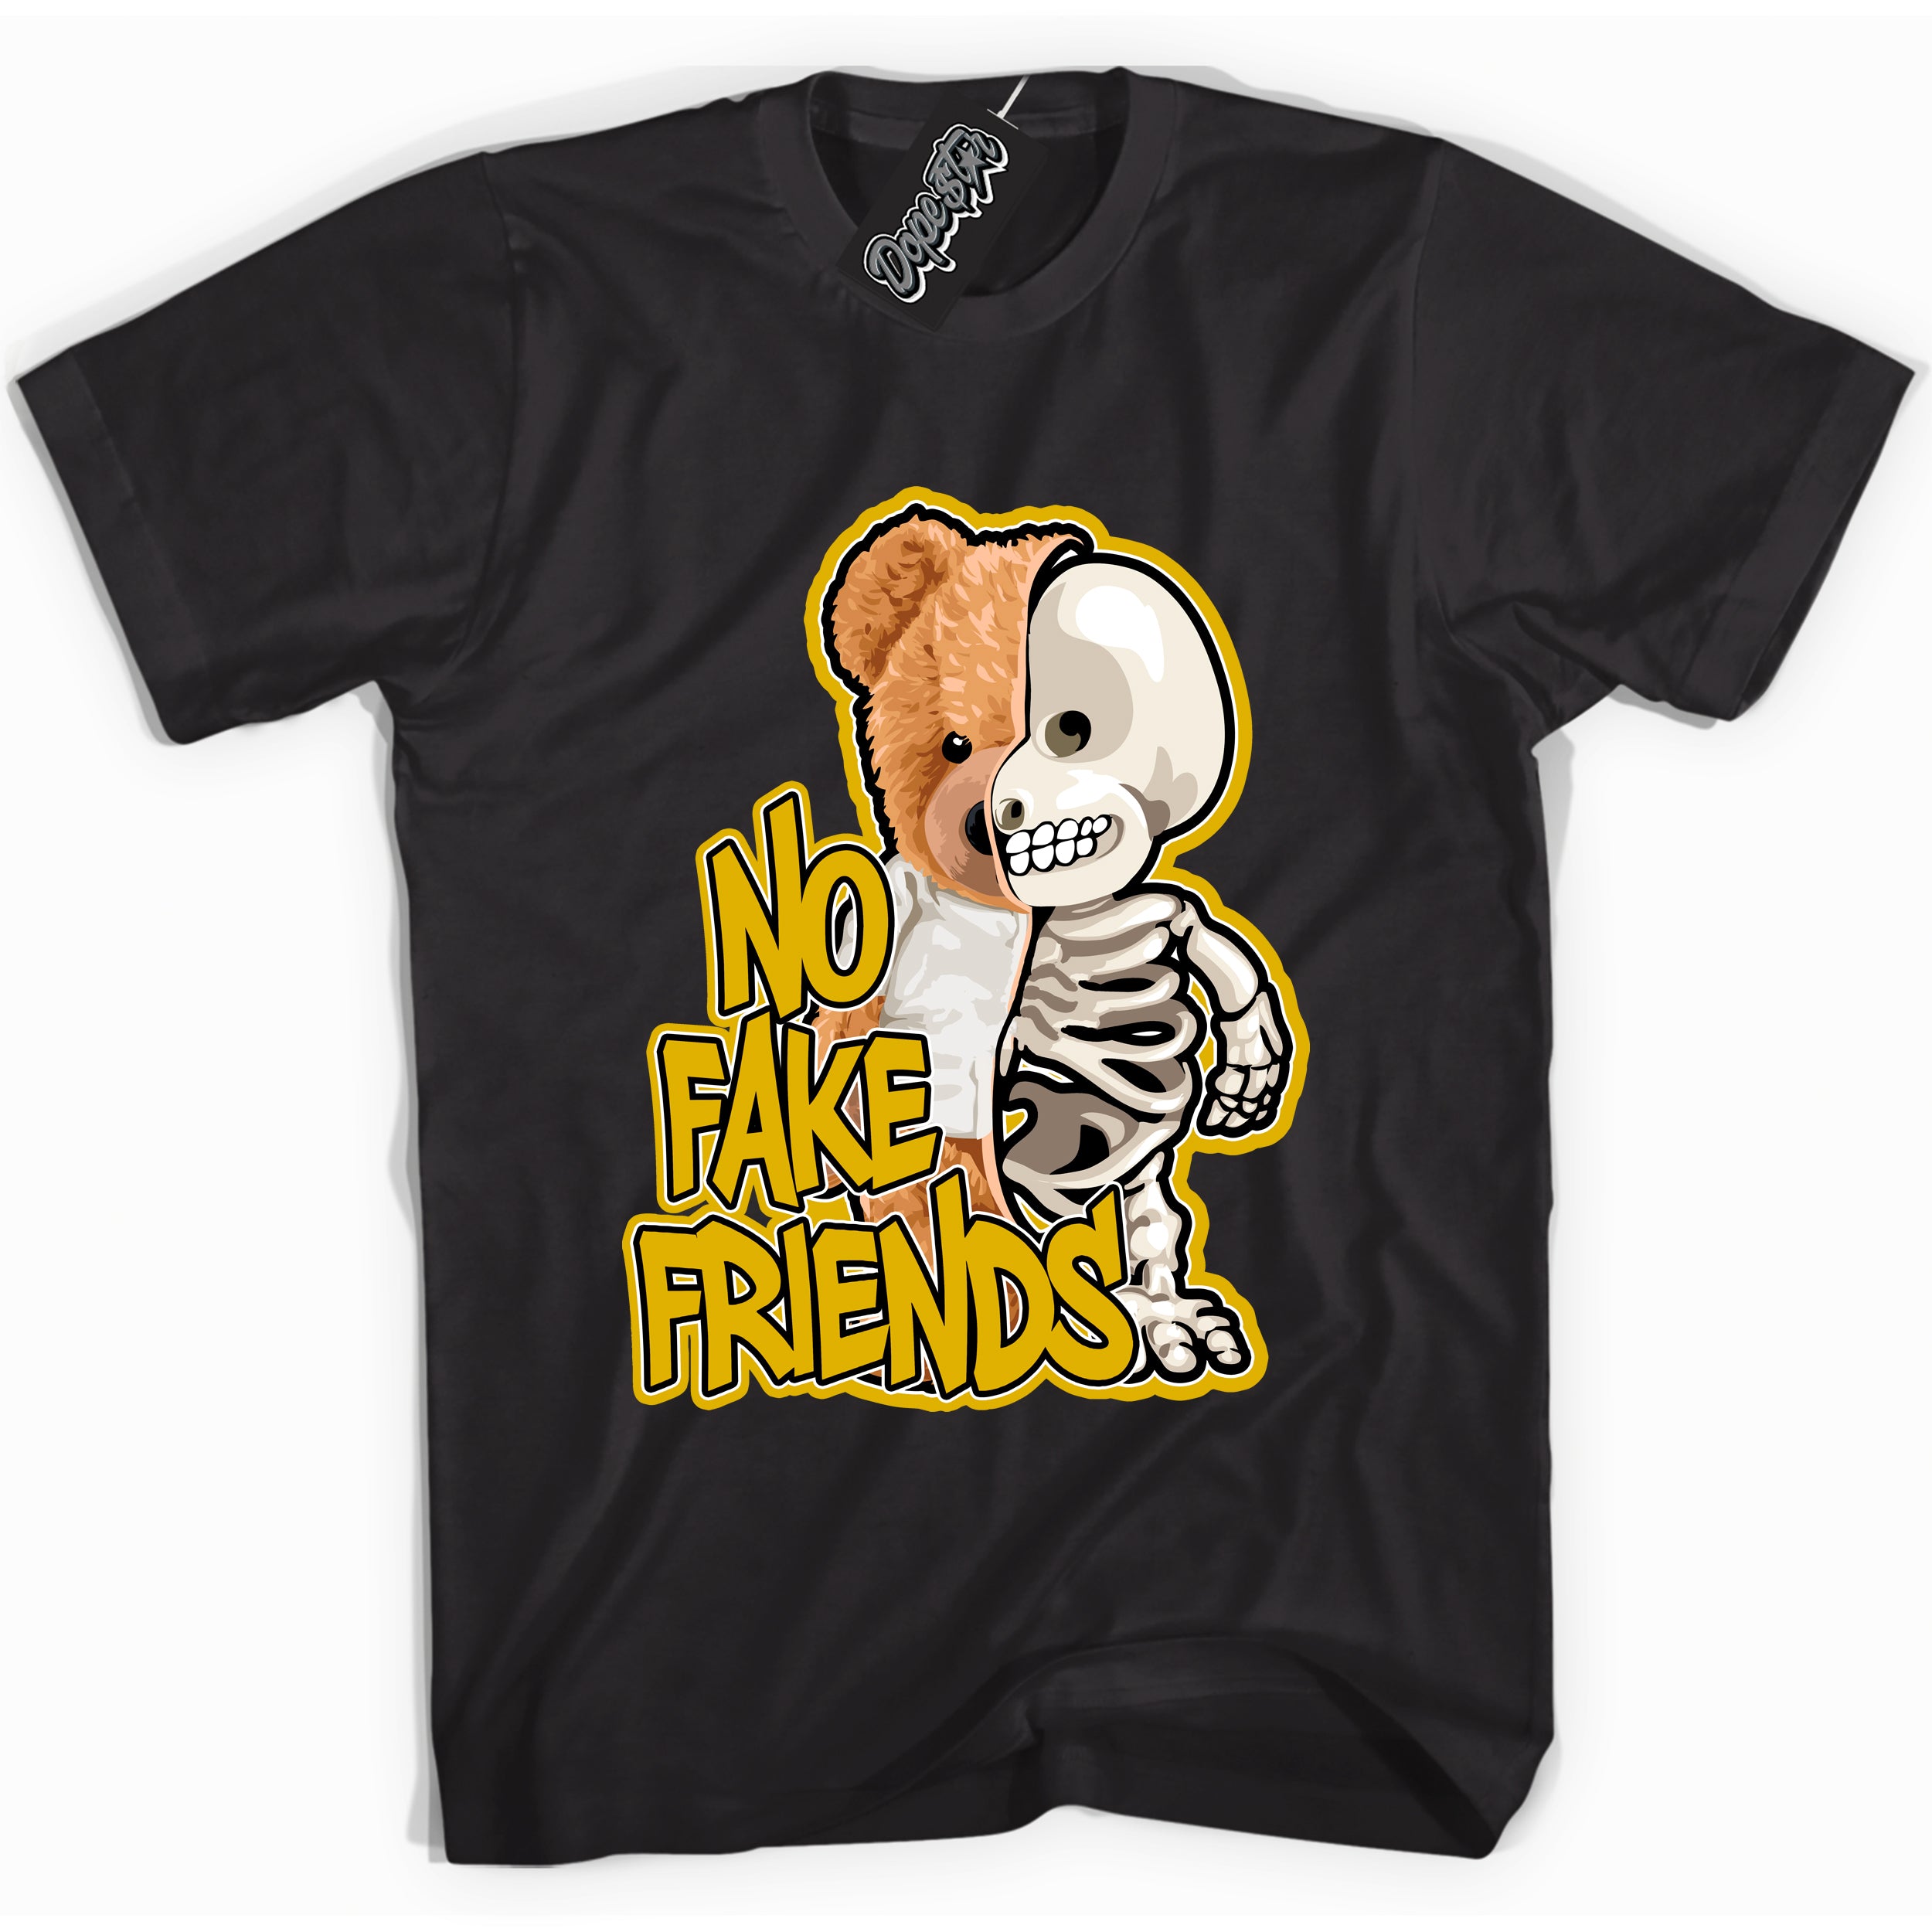 Cool Black Shirt with “ No Fake Friends” design that perfectly matches Yellow Ochre 6s Sneakers.